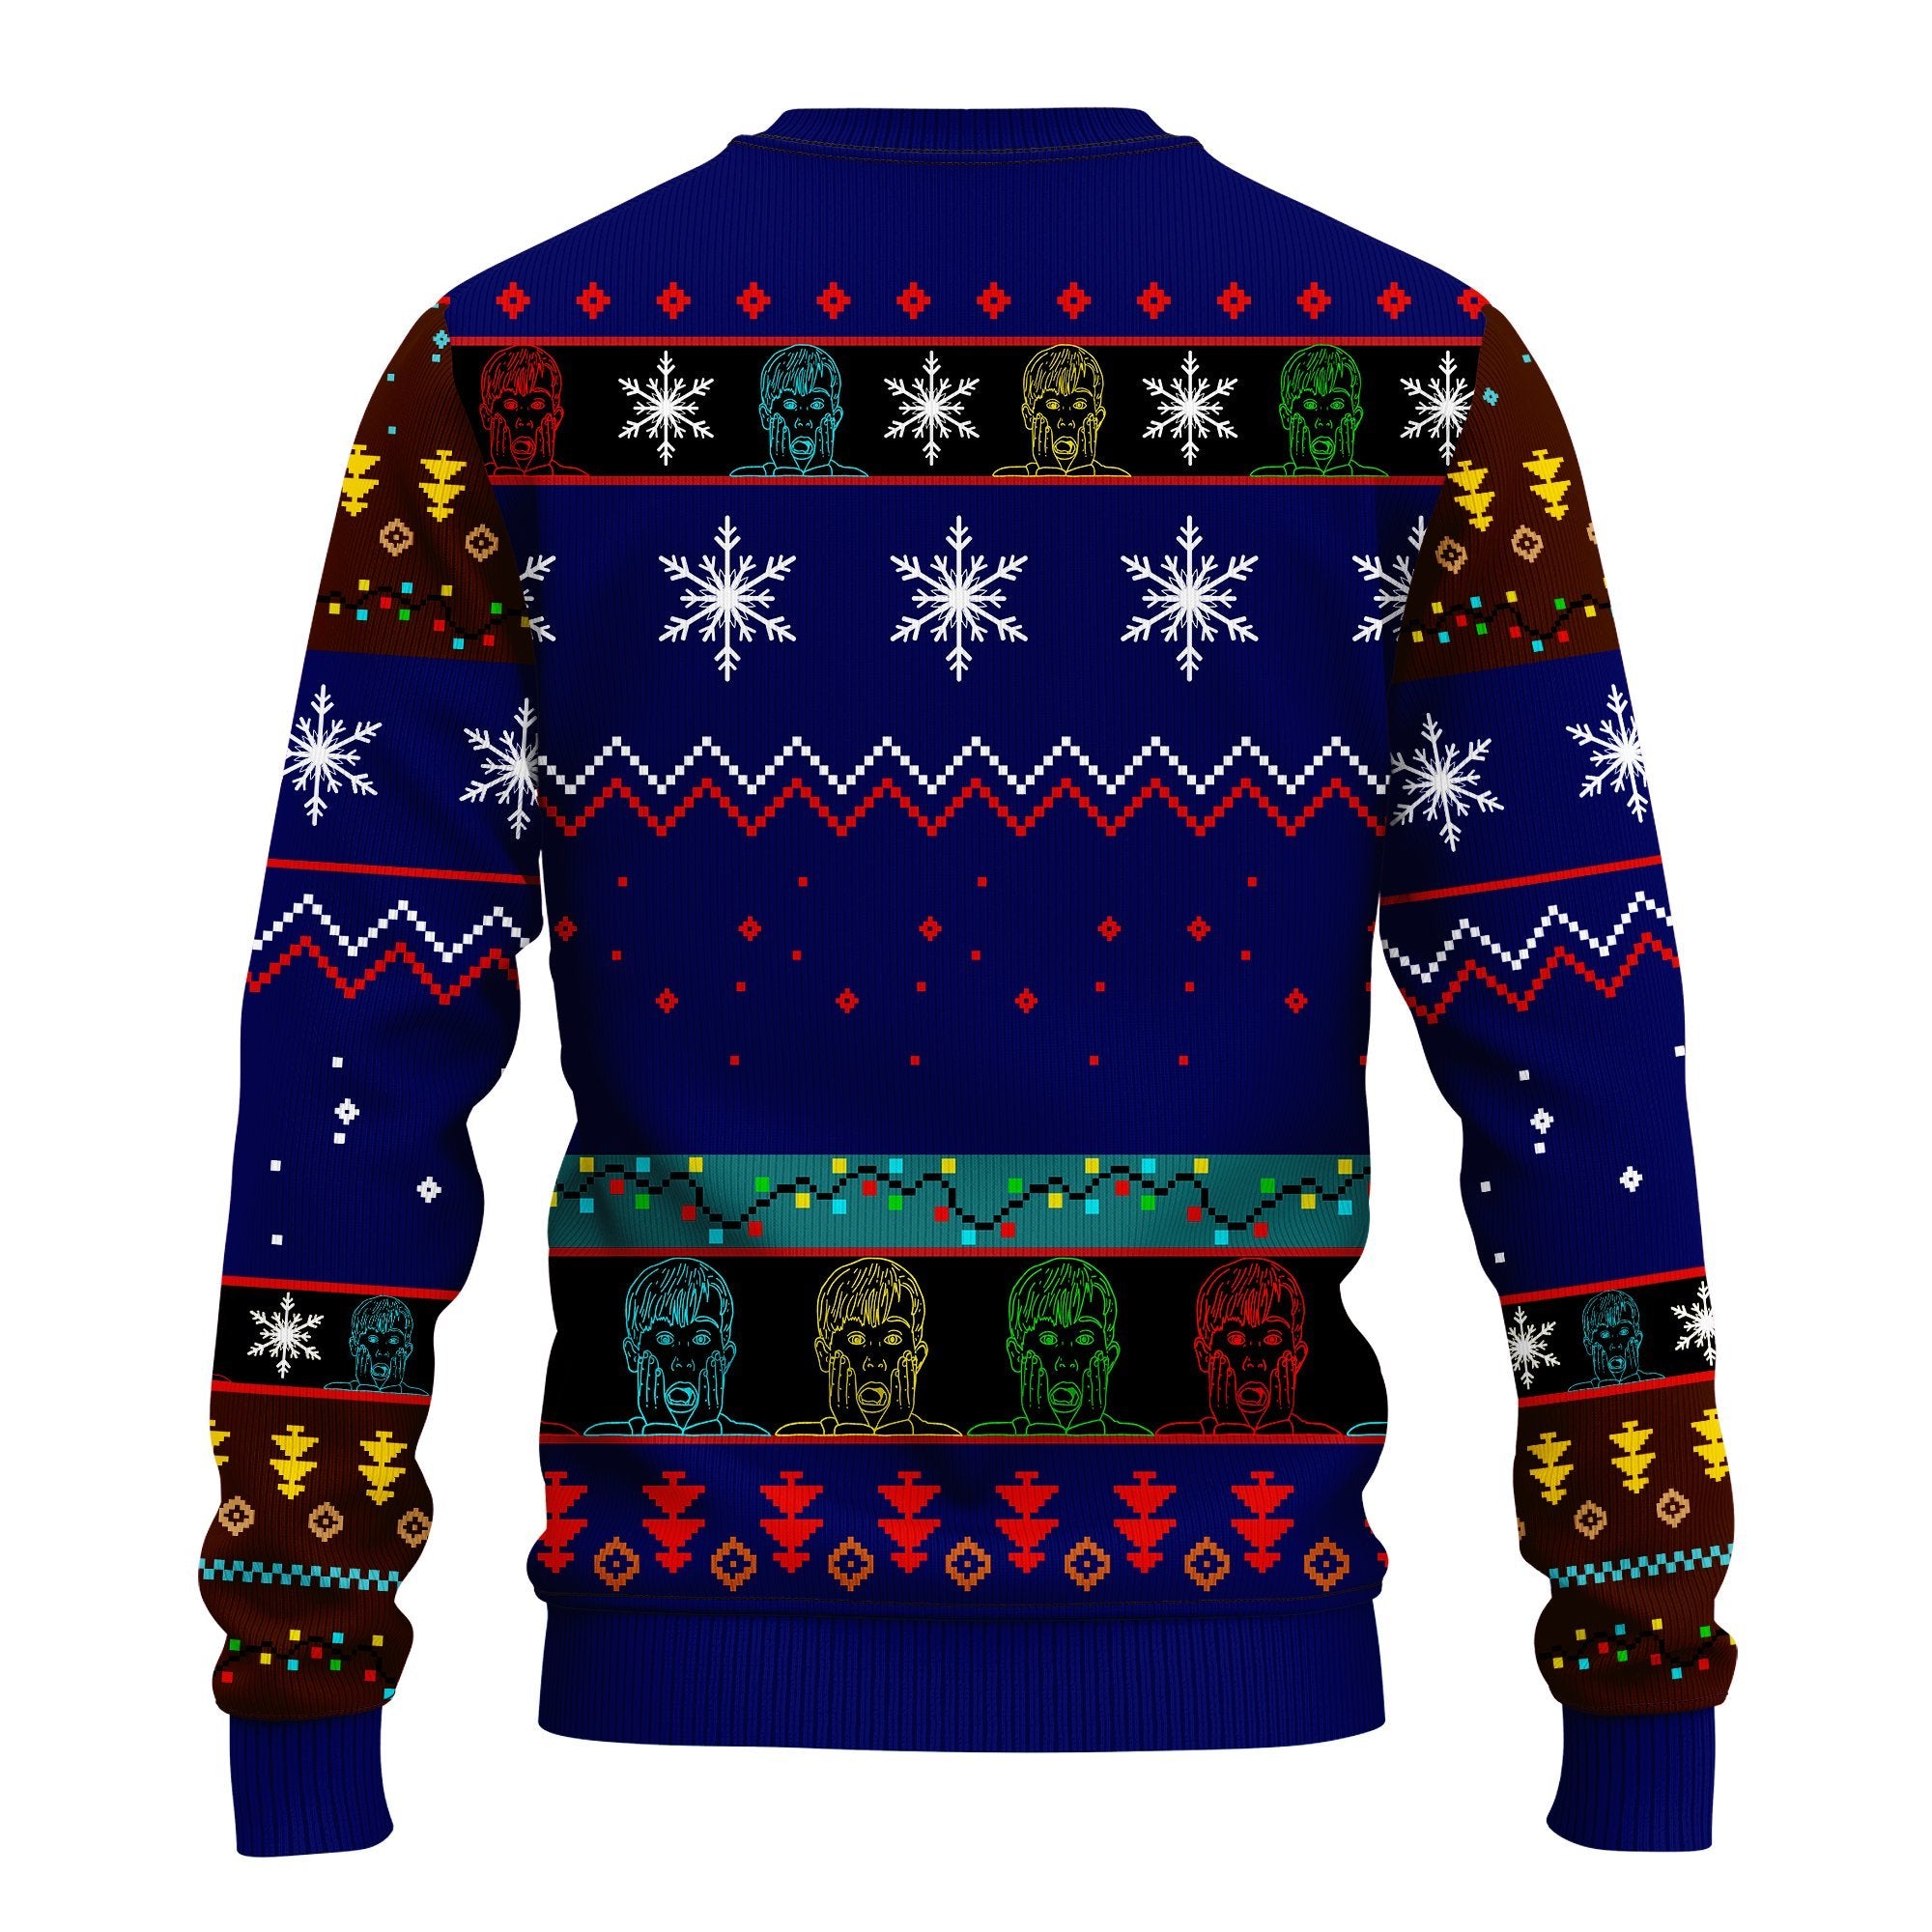 Home Alone Ugly Christmas Sweater Blue 1 Amazing Gift Idea Thanksgiving Gift